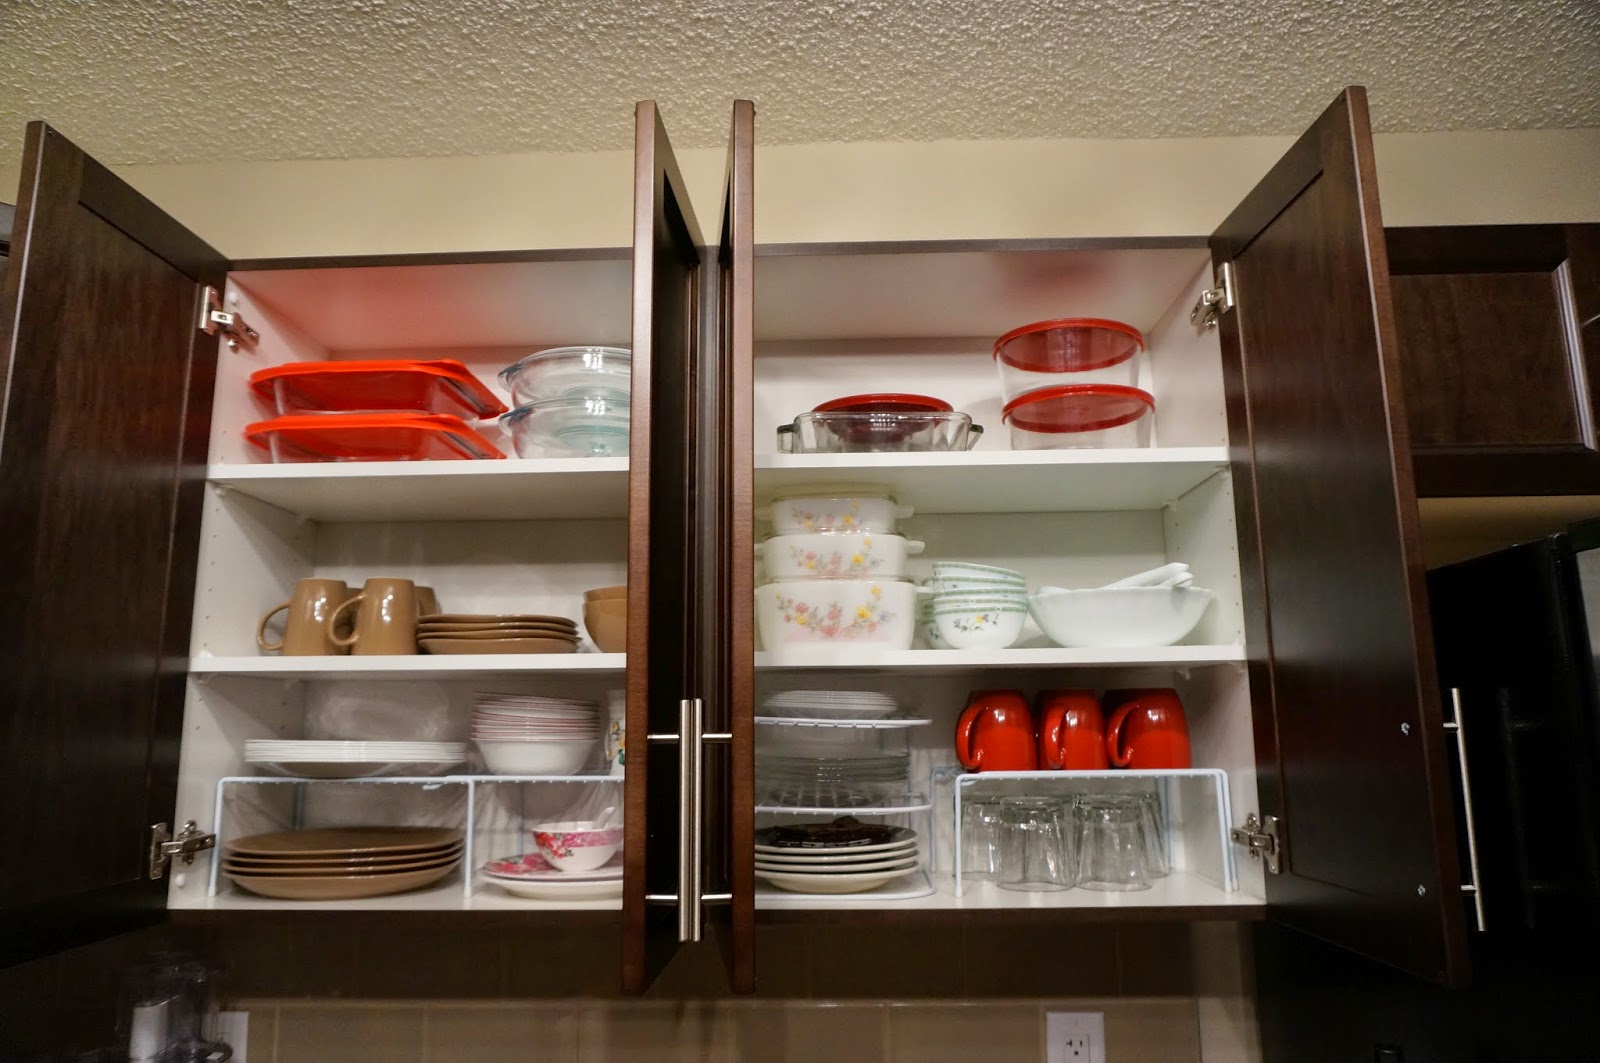 We Love Cozy Homes How to Organize Kitchen Shelves?